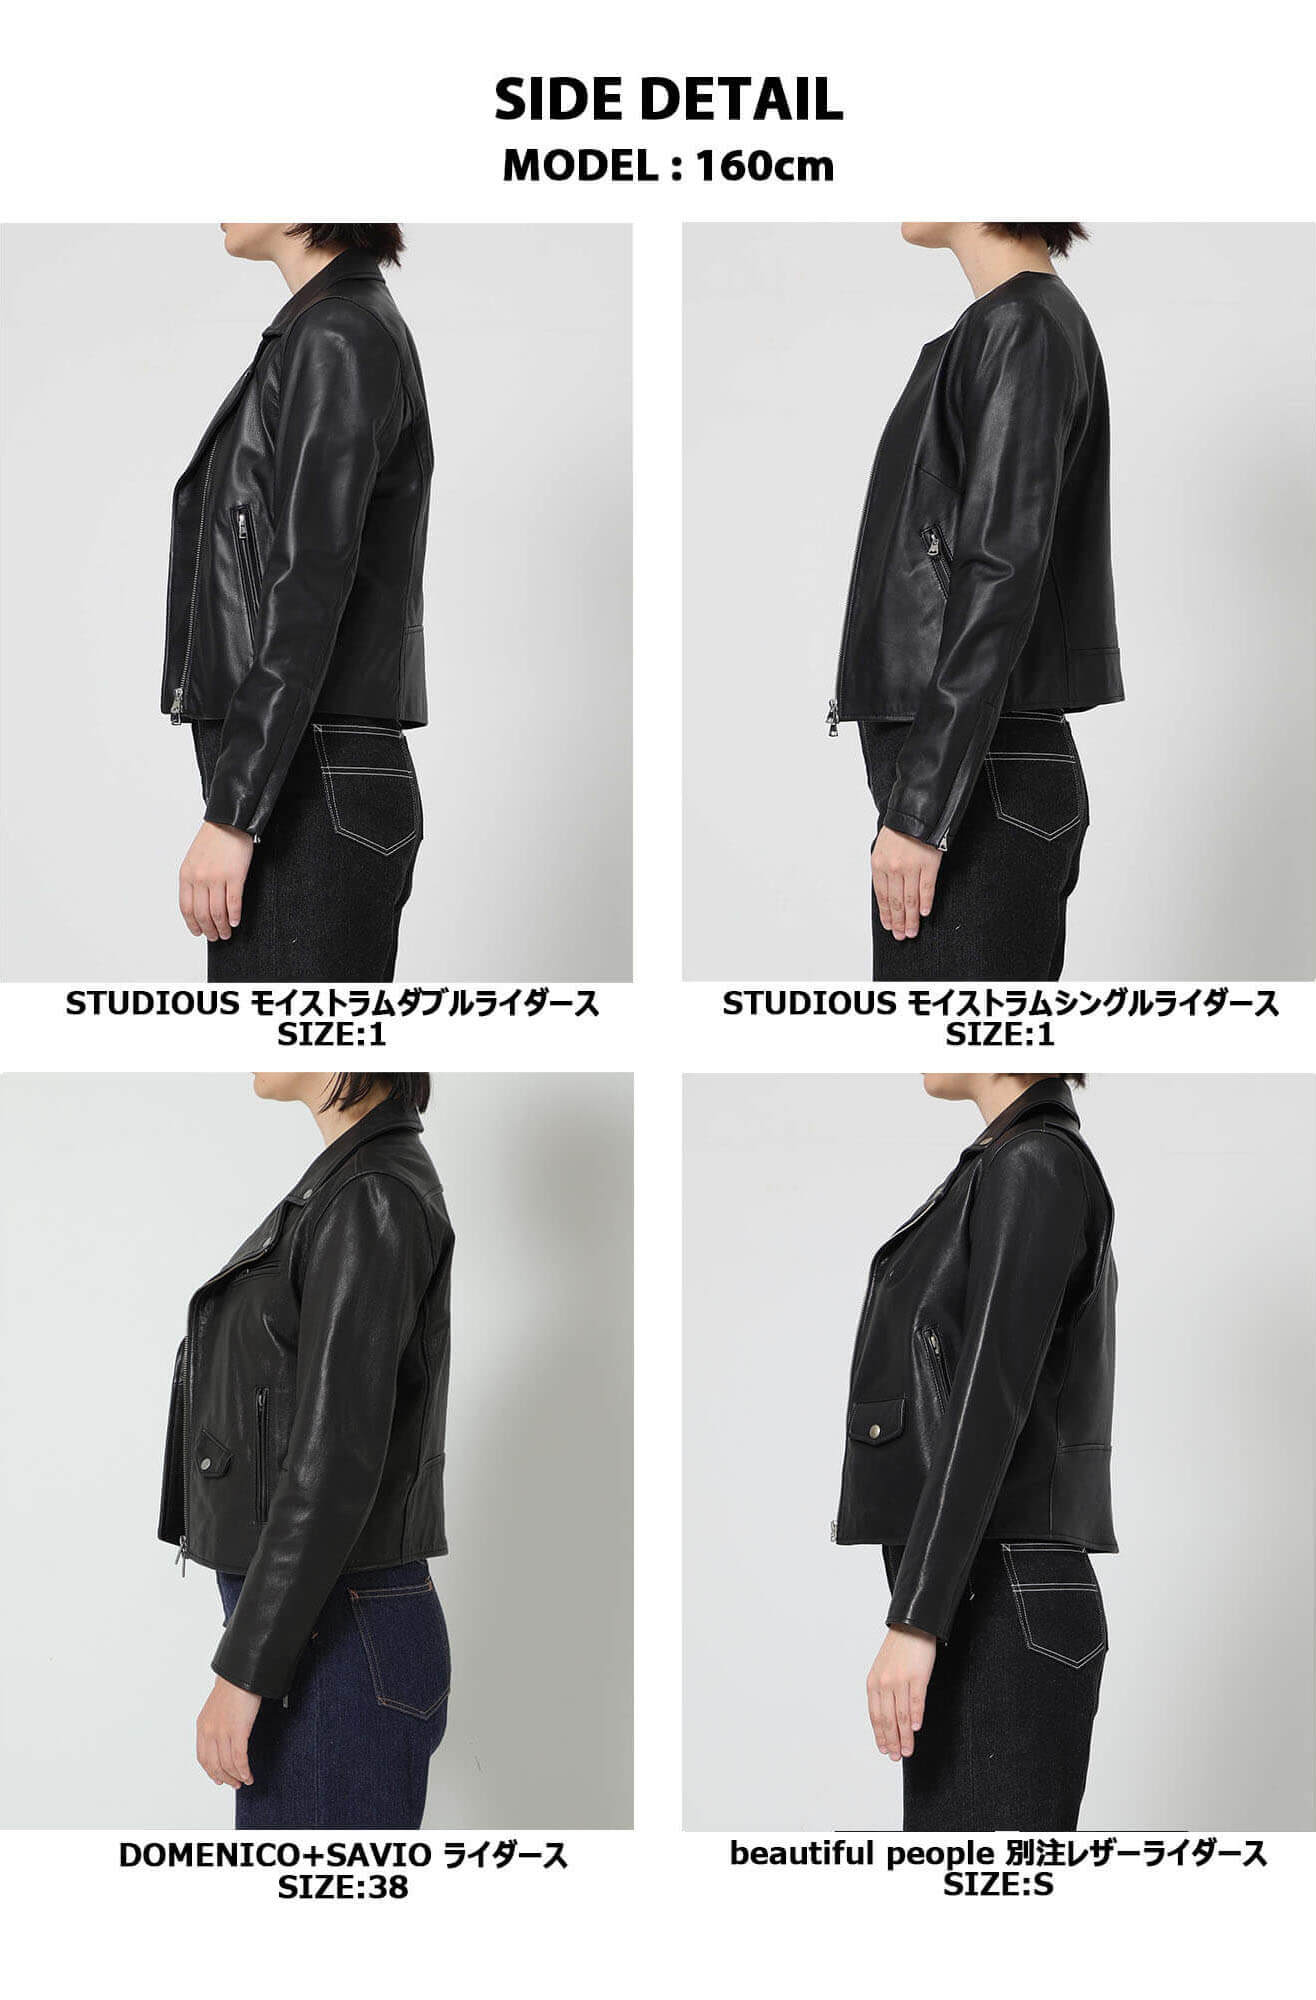 LEATHER COLLECTION 2020 A⁄W｜ STUDIOUS ONLINE公式通販サイト